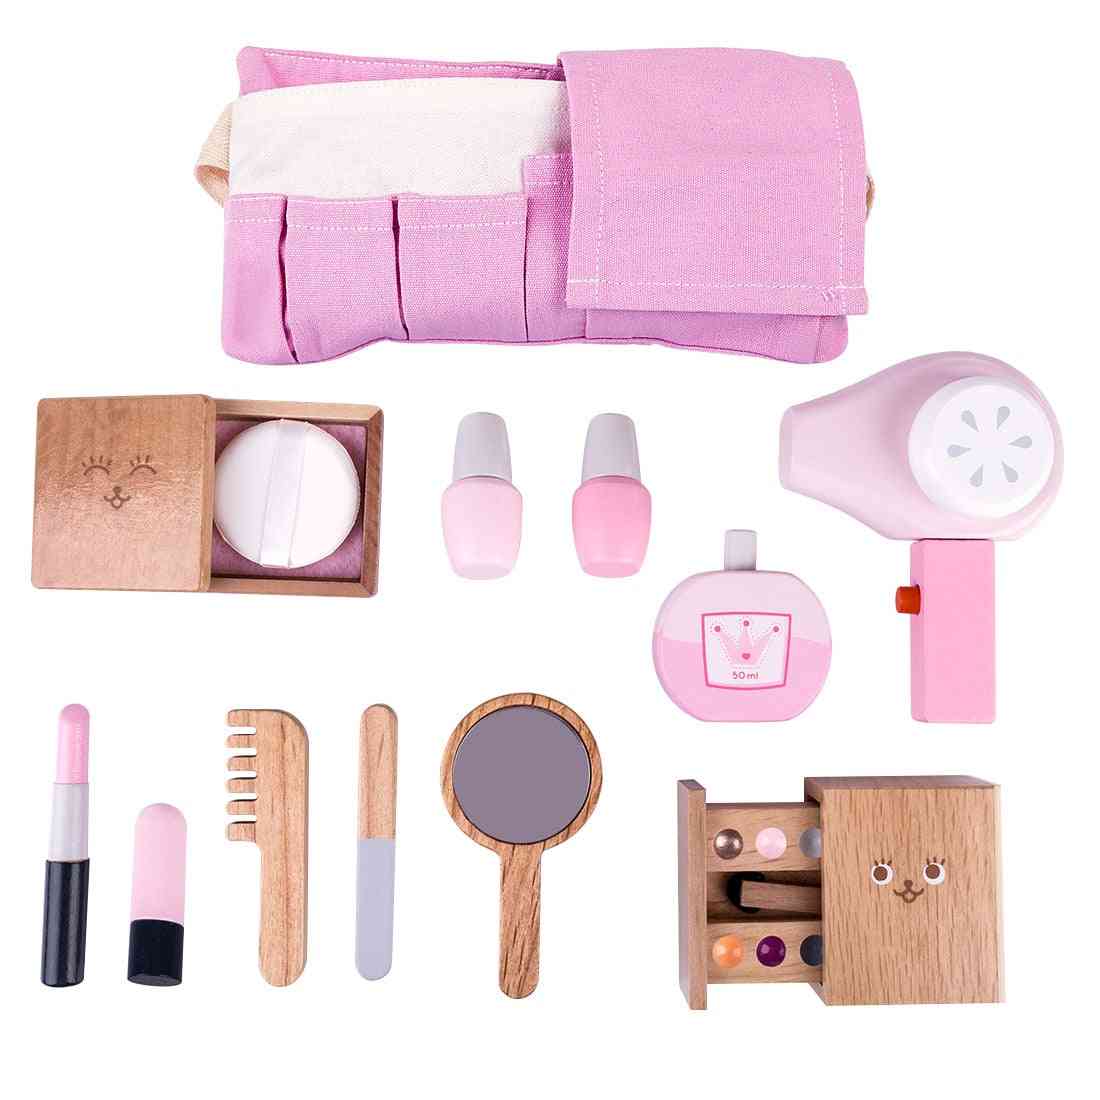 12pcs Of Wooden Makeup Pretend Play Set-simulation For